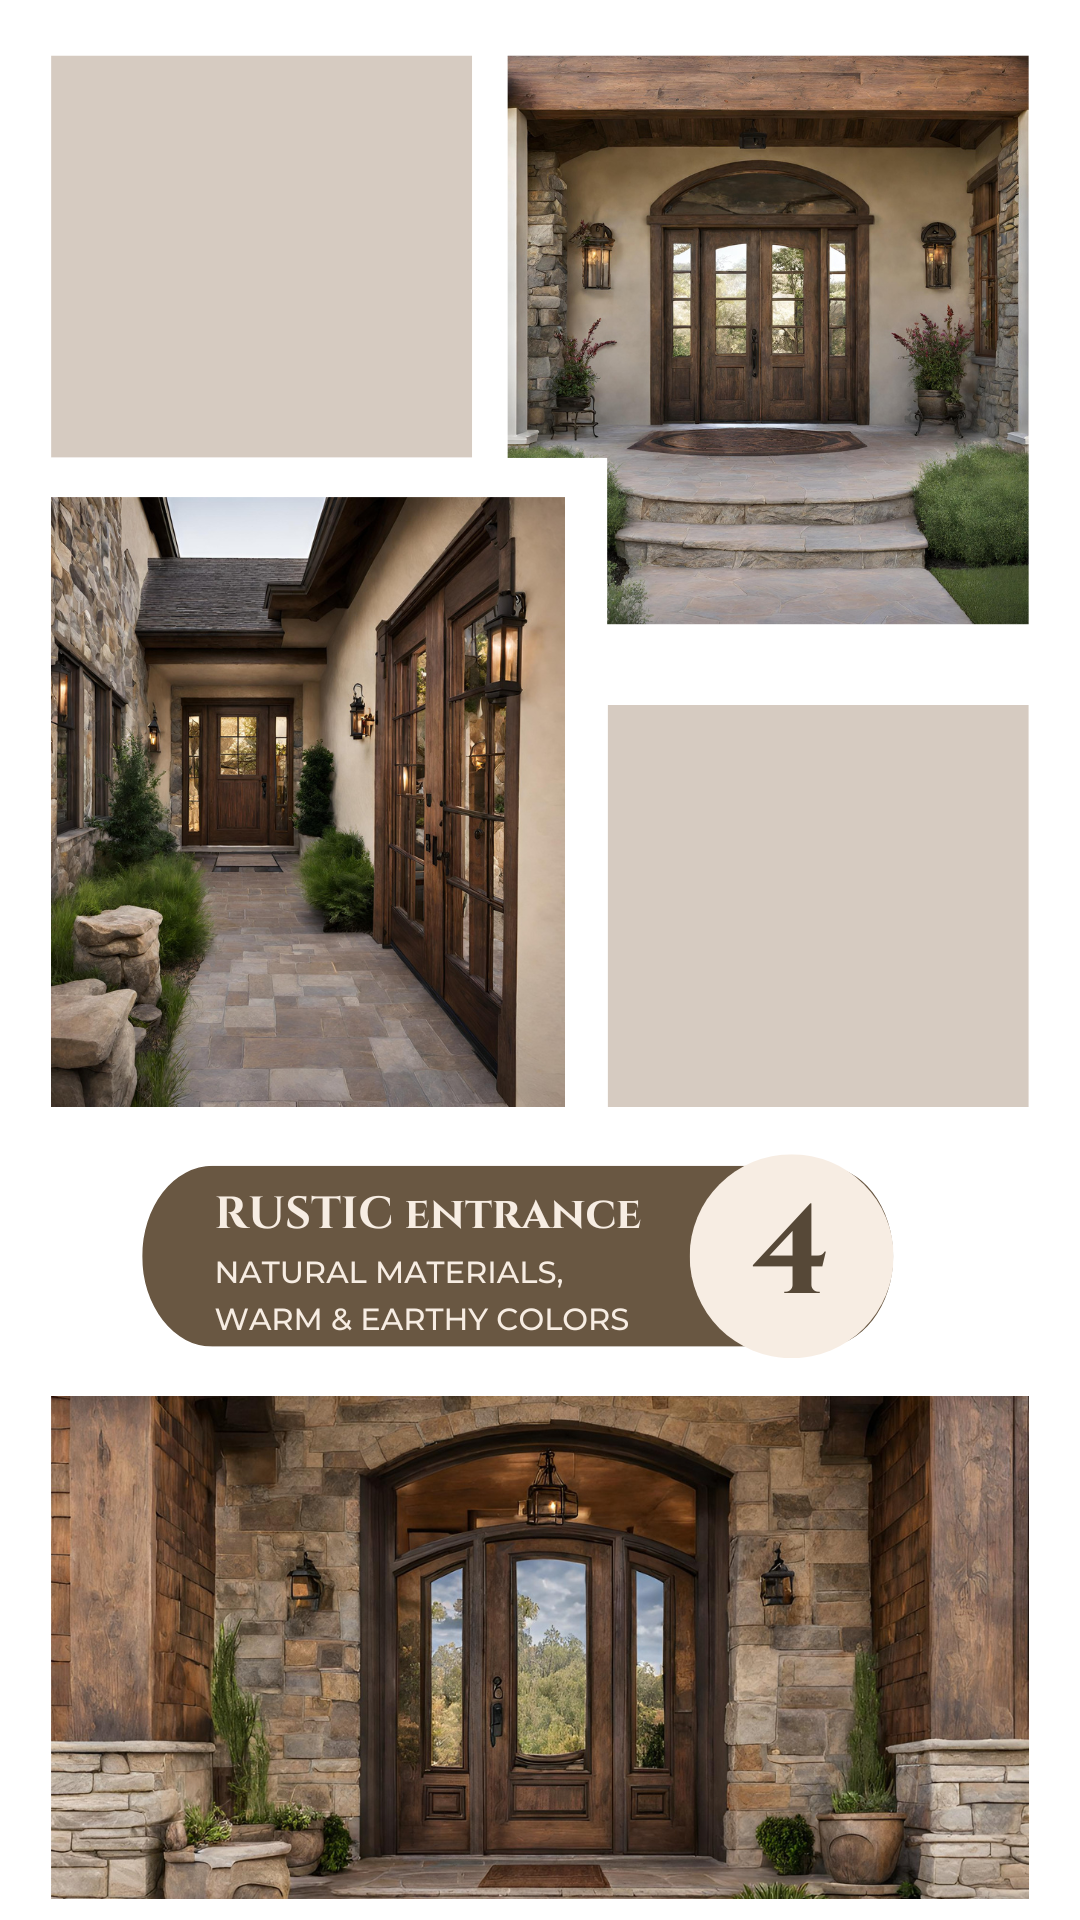 Rustic Entranceway Elegance: Where Warmth and Tradition Meet